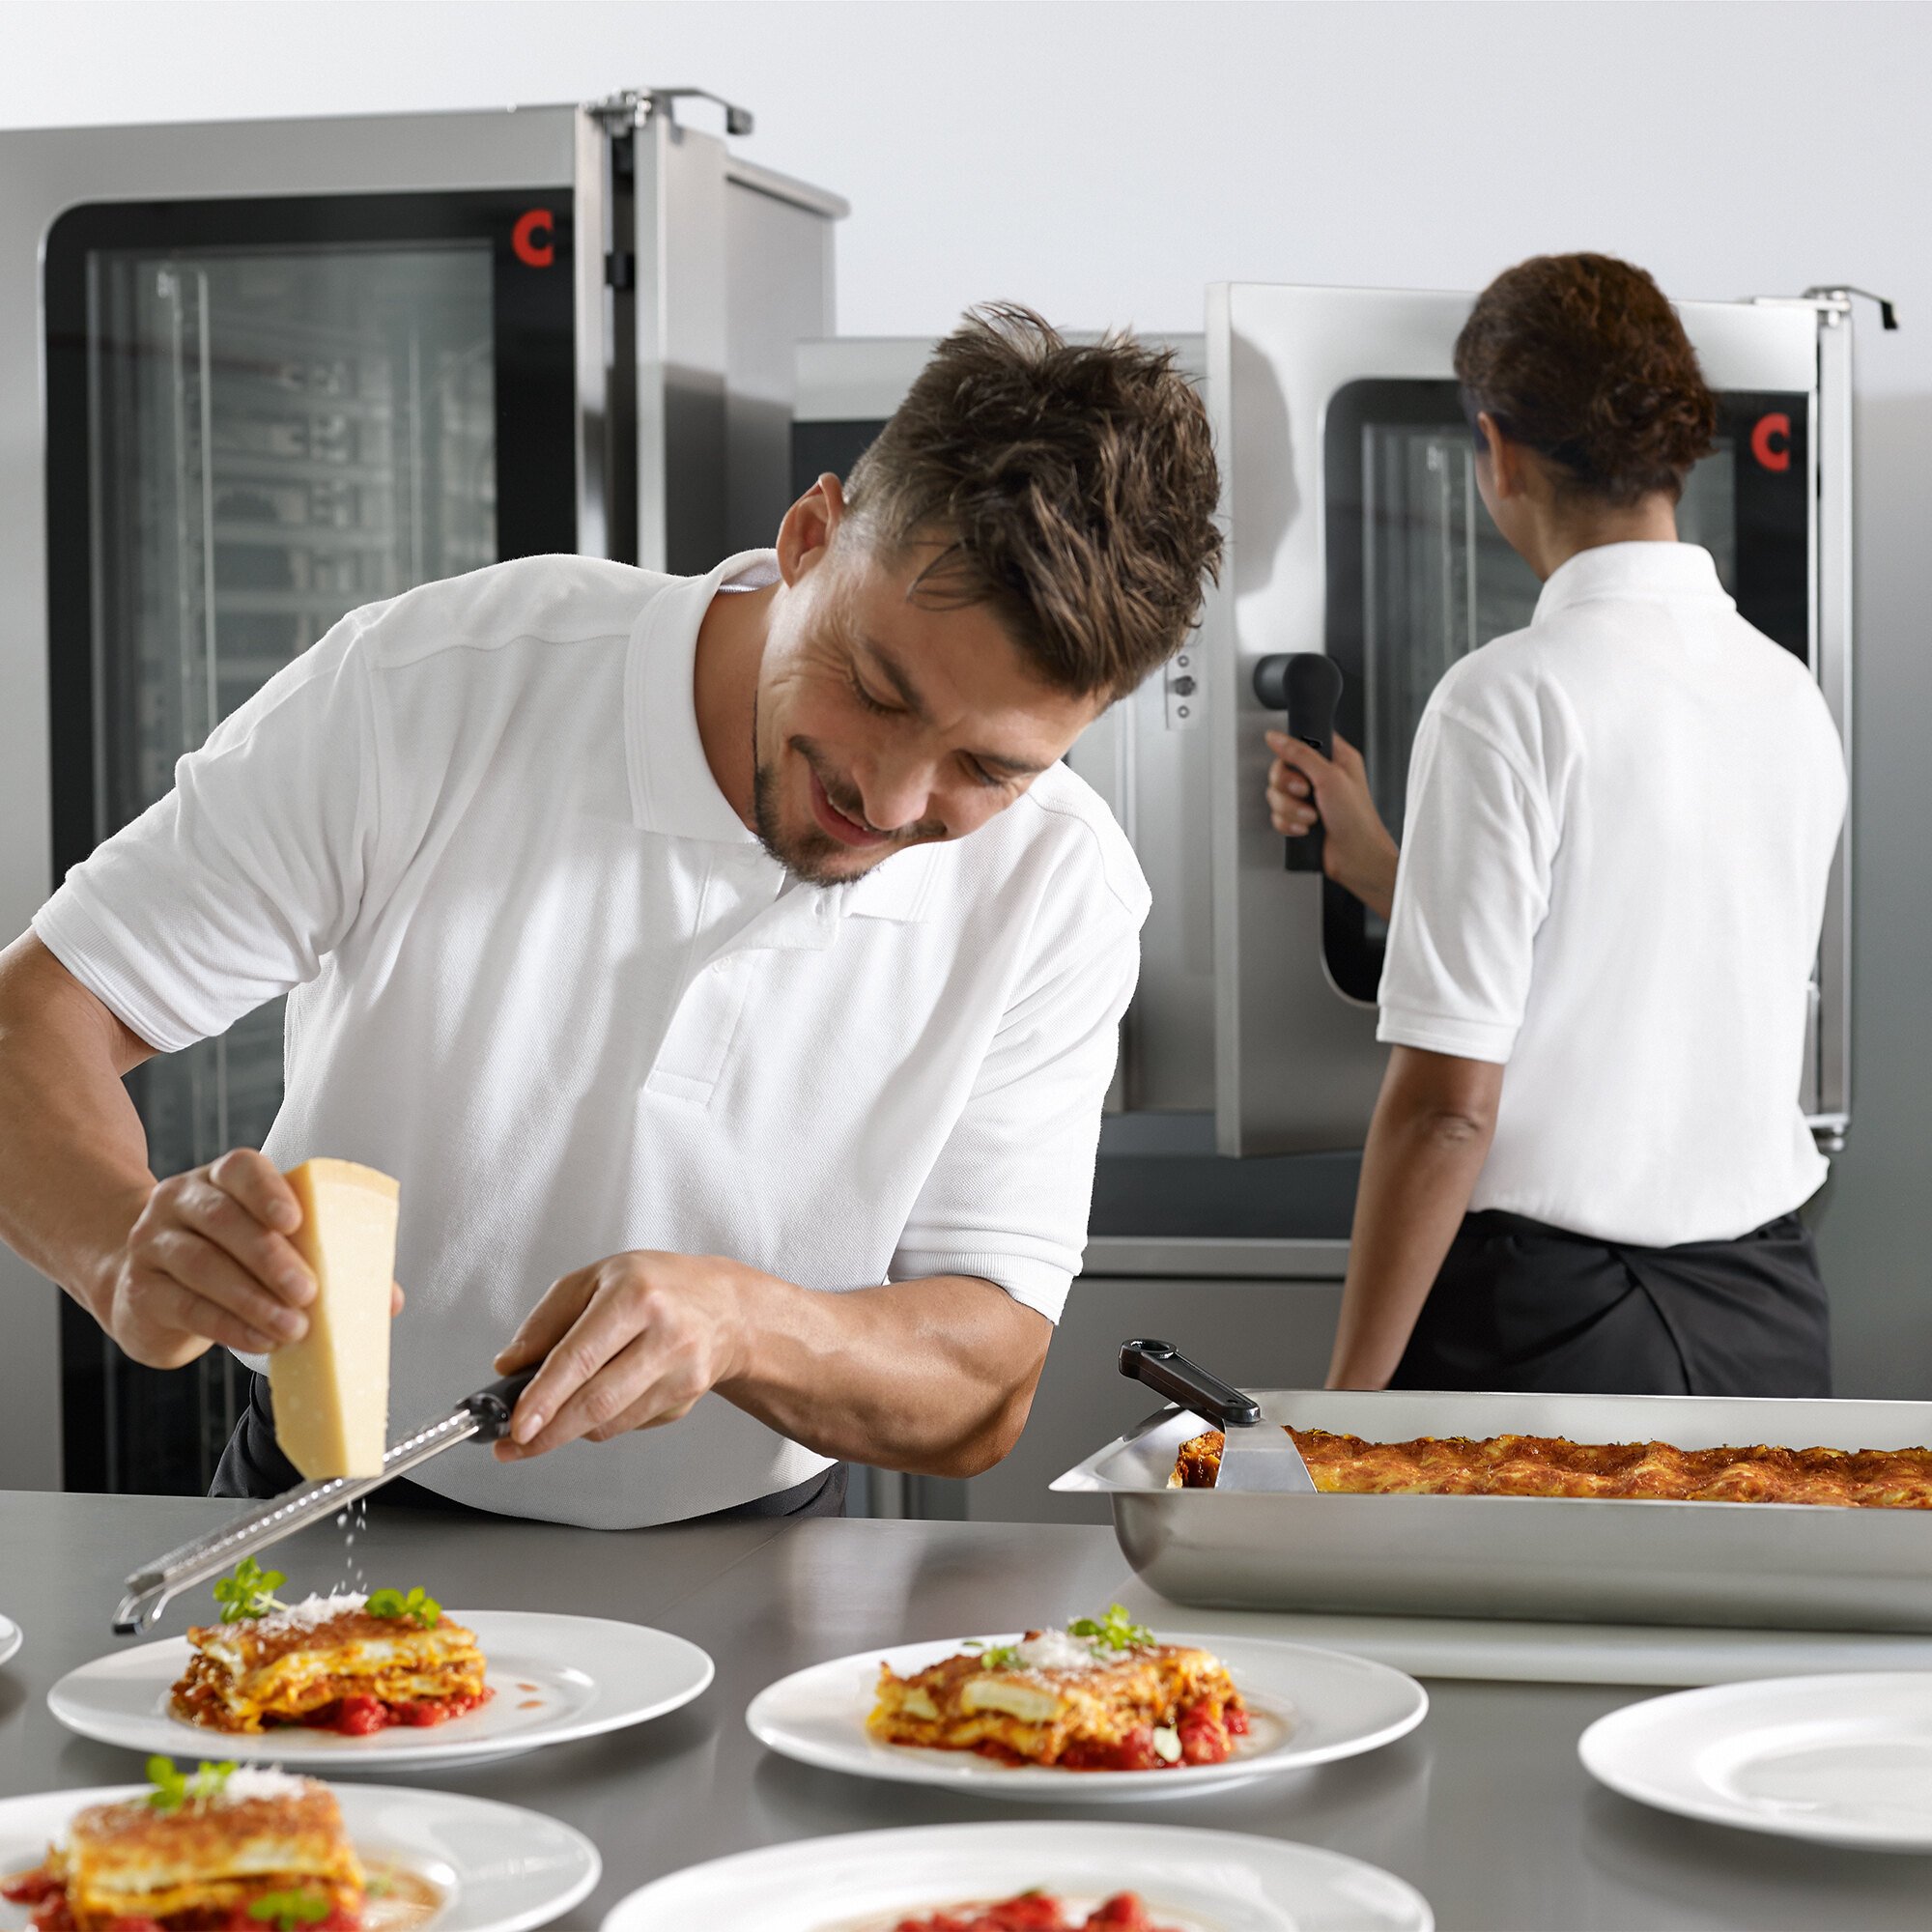 Chefs preparing food using Convotherm combi ovens